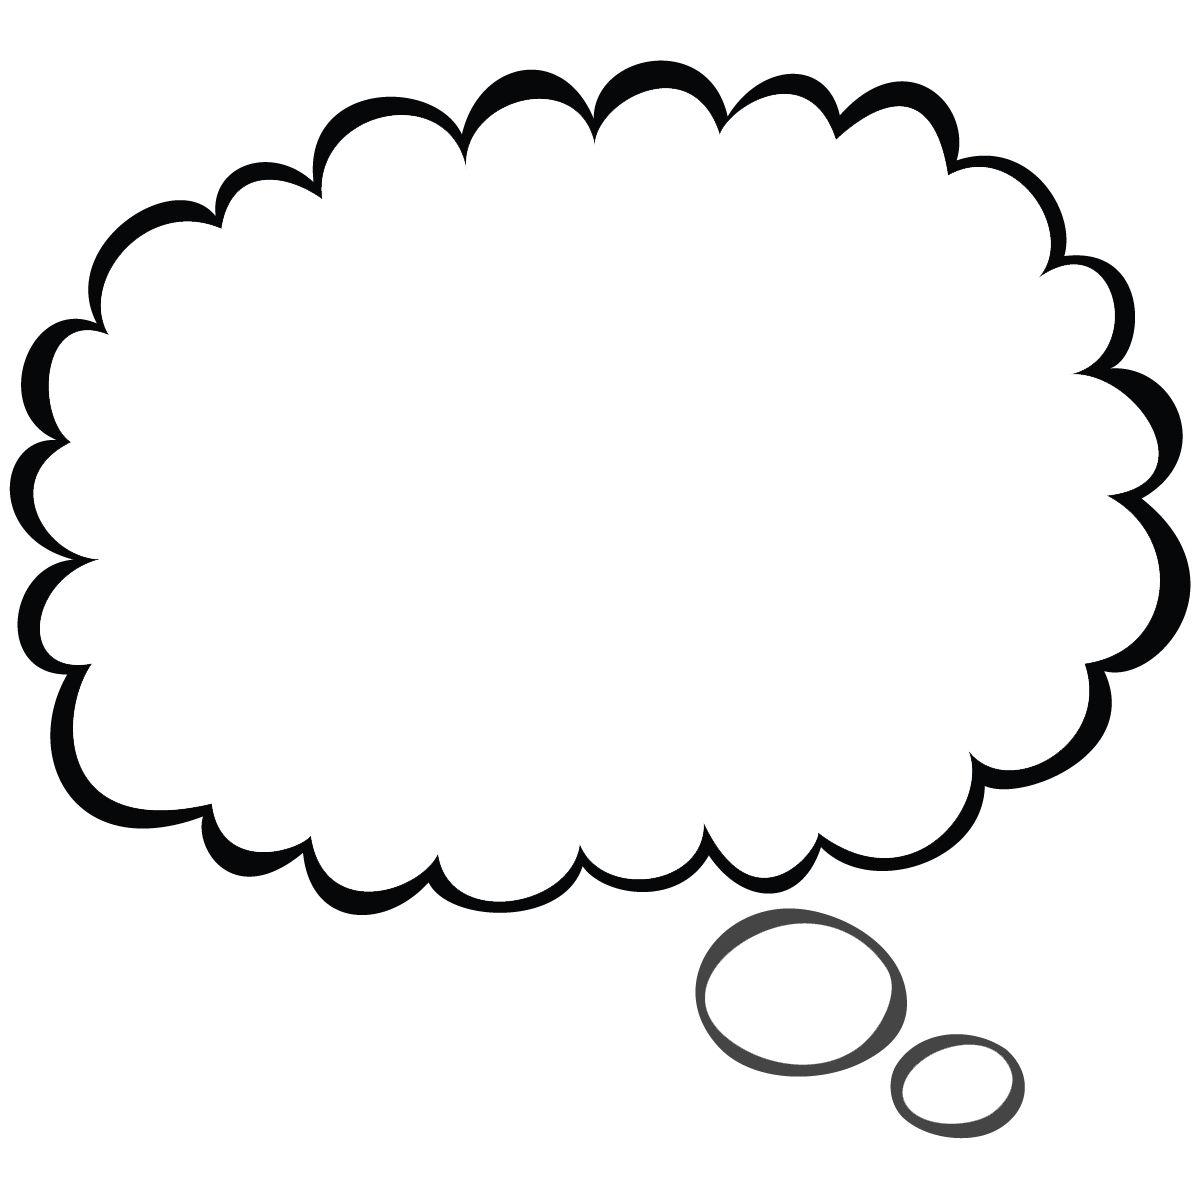 Thought Bubble Free Download PNG | PNG All